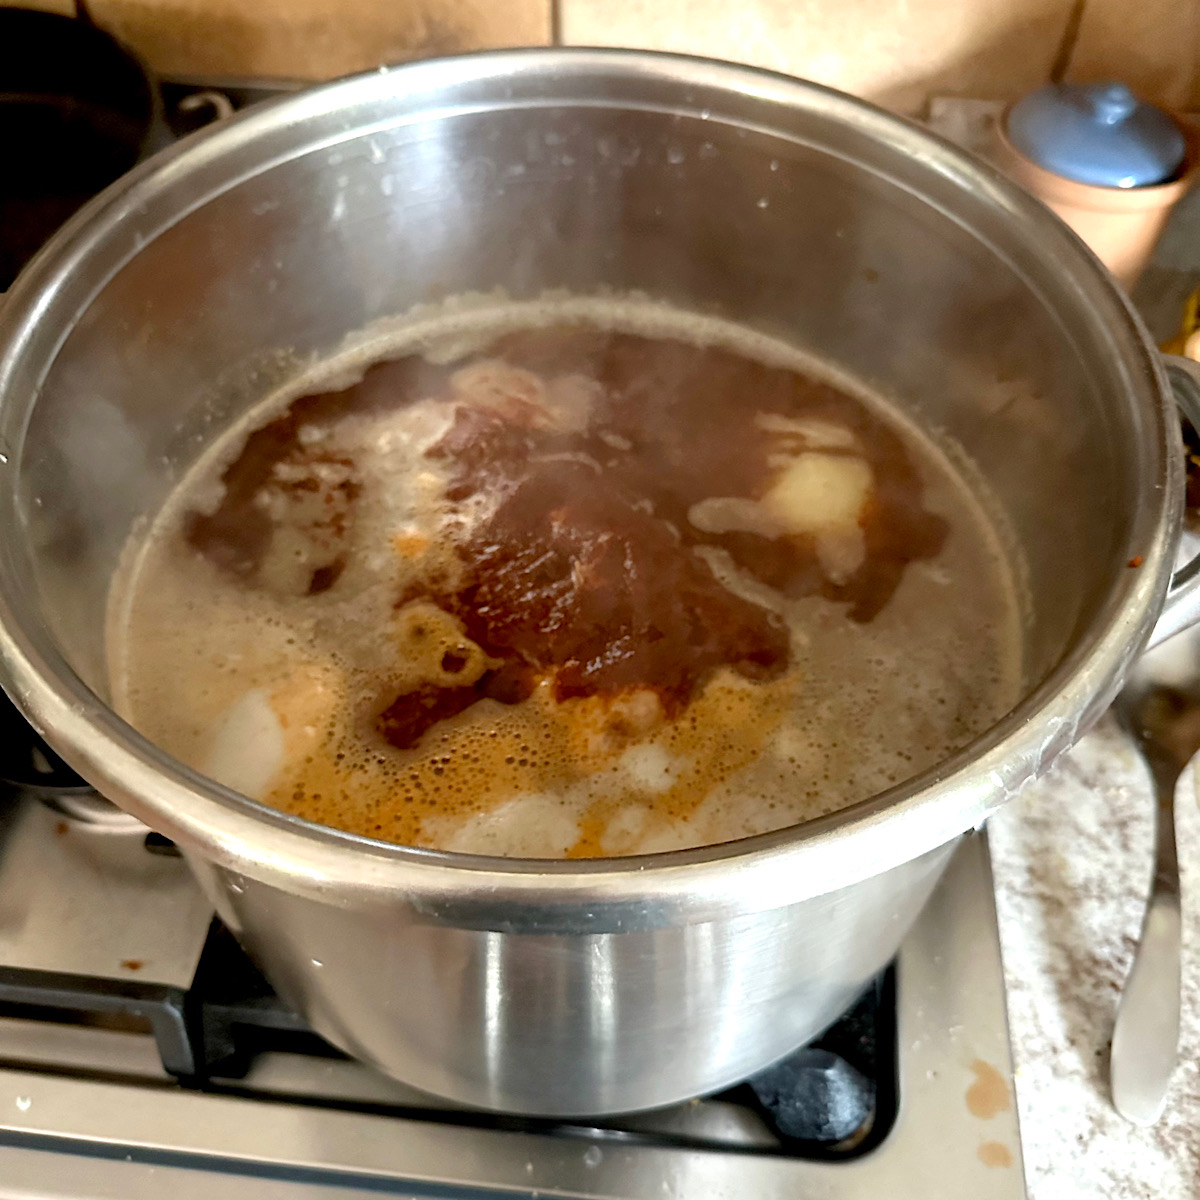 Pork butt, spices and rojo sauce simmering in pot